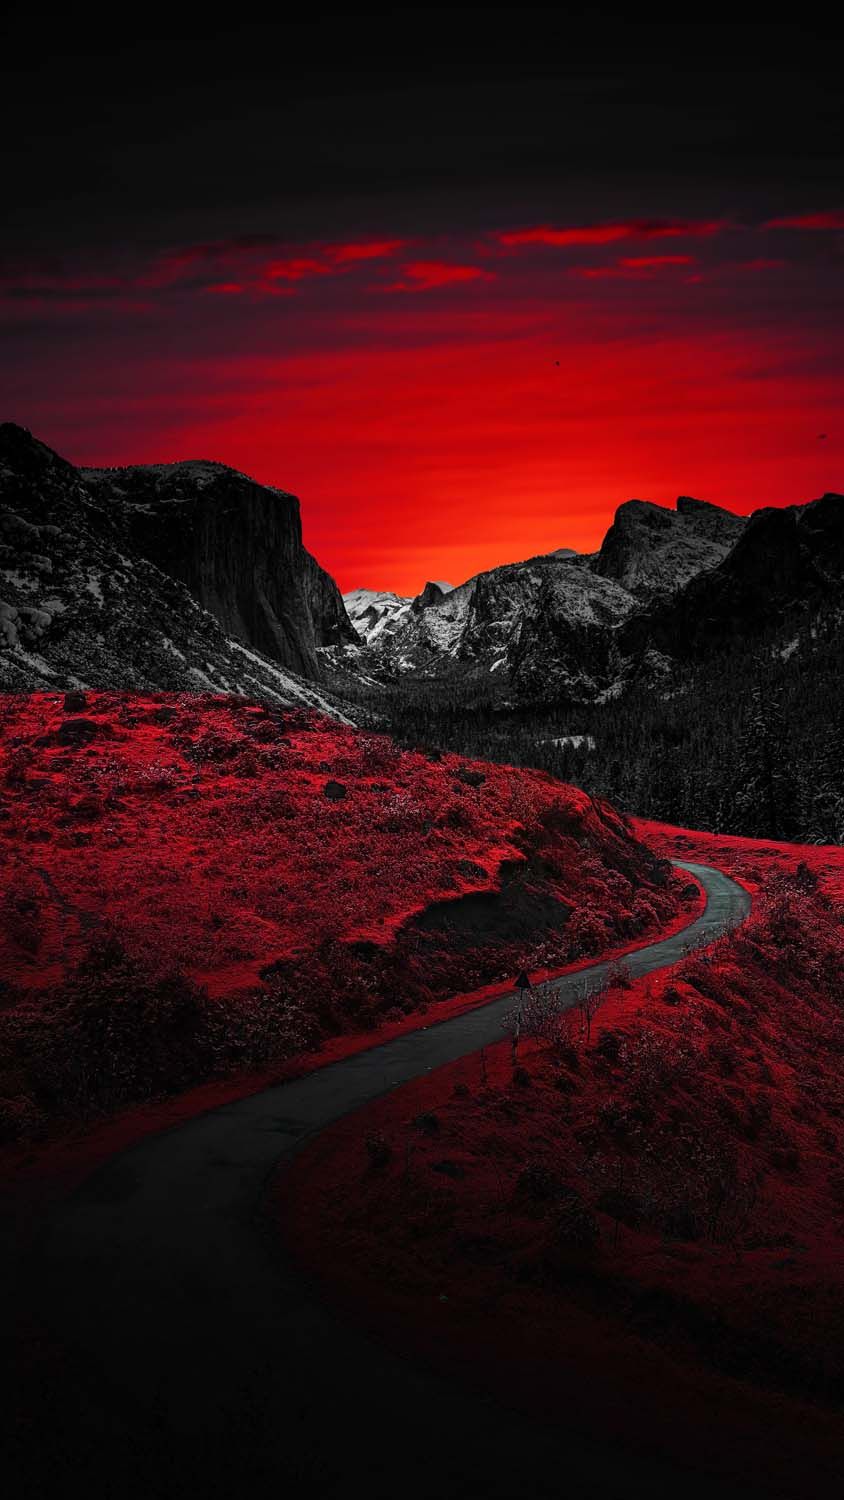 IPhone wallpaper of a red sky and mountains. - IPhone red, light red